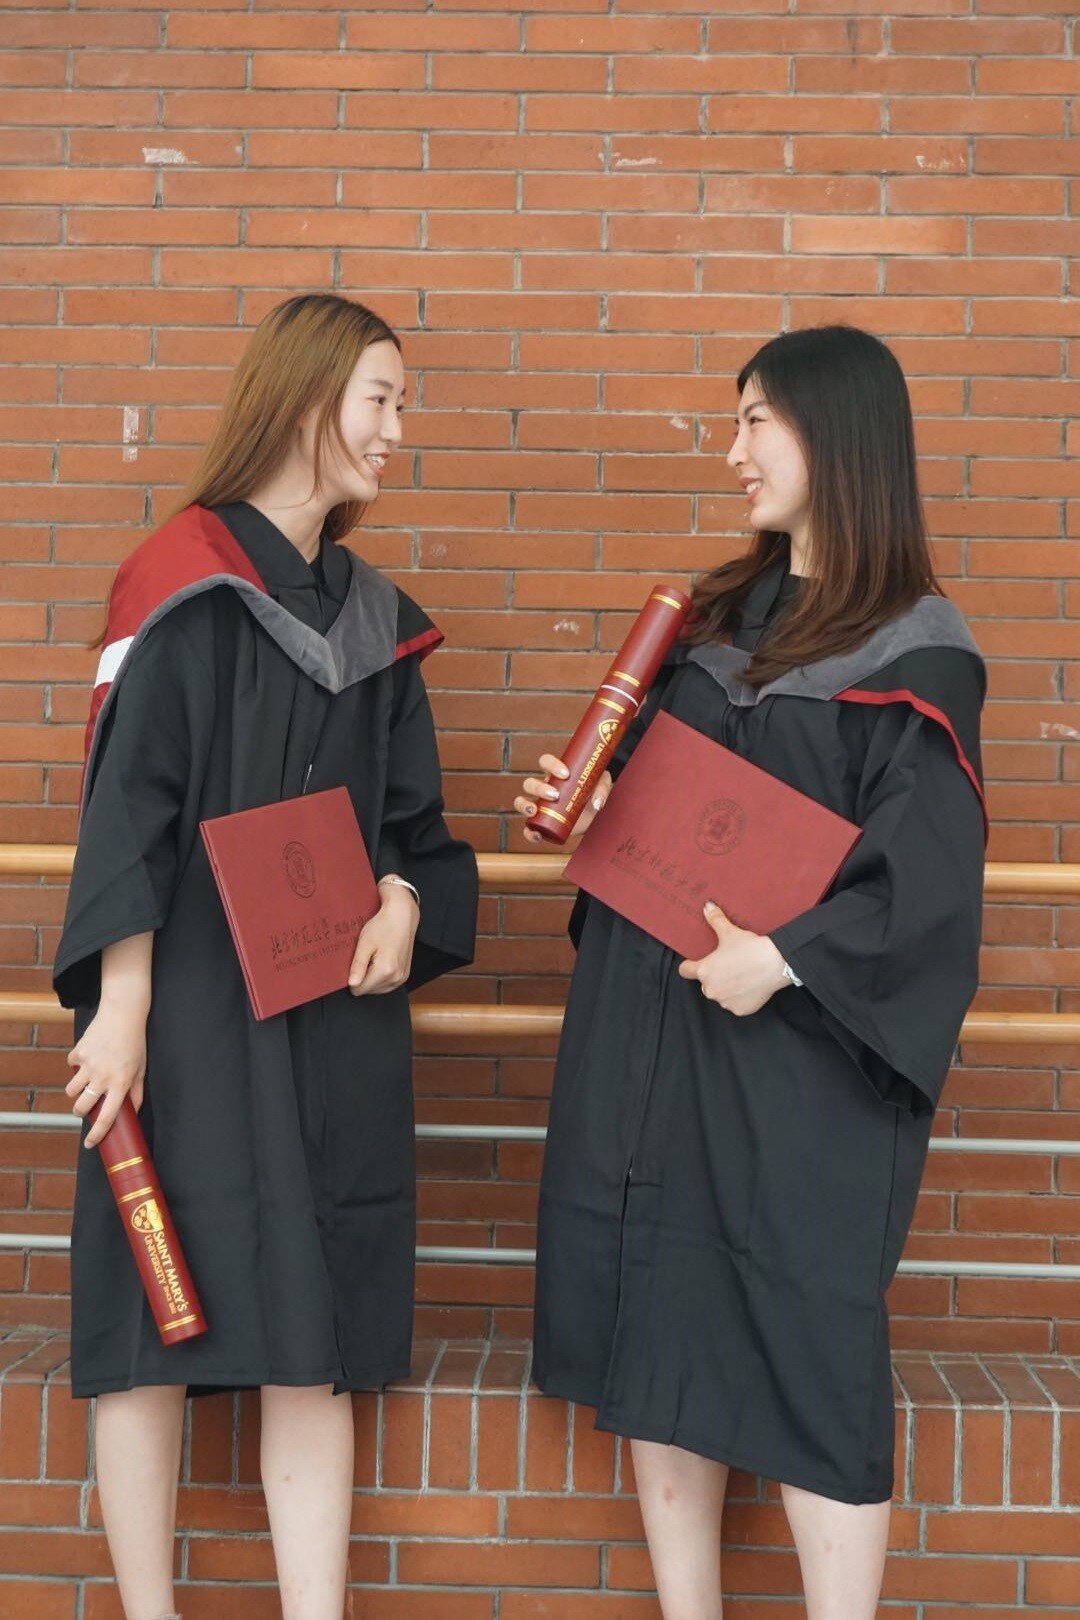   Zou Tiantian (left) plans to continue her postgraduate studies at Johns Hopkins University in September. Han Qi (right) will travel to Italy to begin a master’s program at Bocconi University this fall. 47 of the 63 graduates will pursue postgraduat